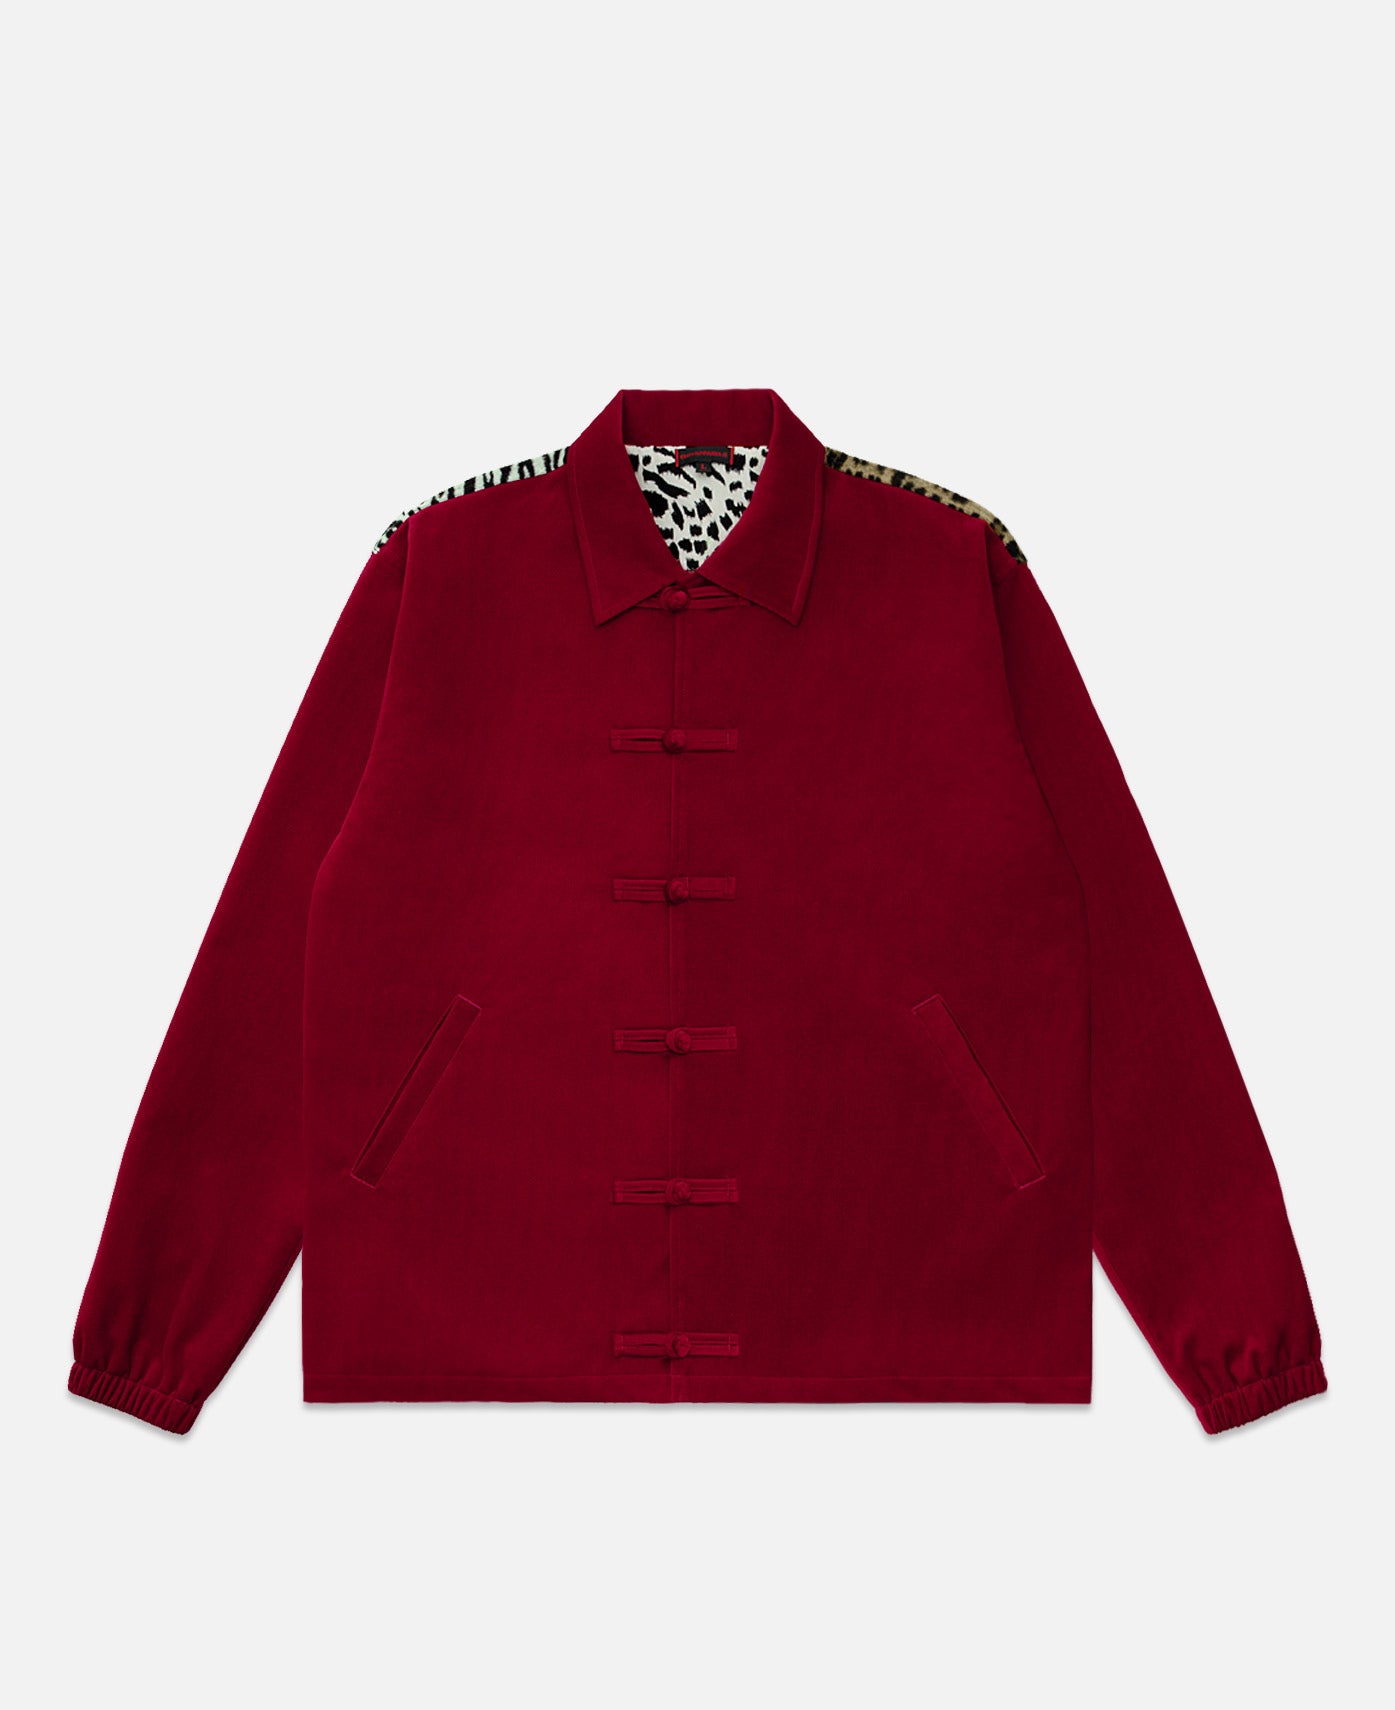 Coach Jacket (Red)